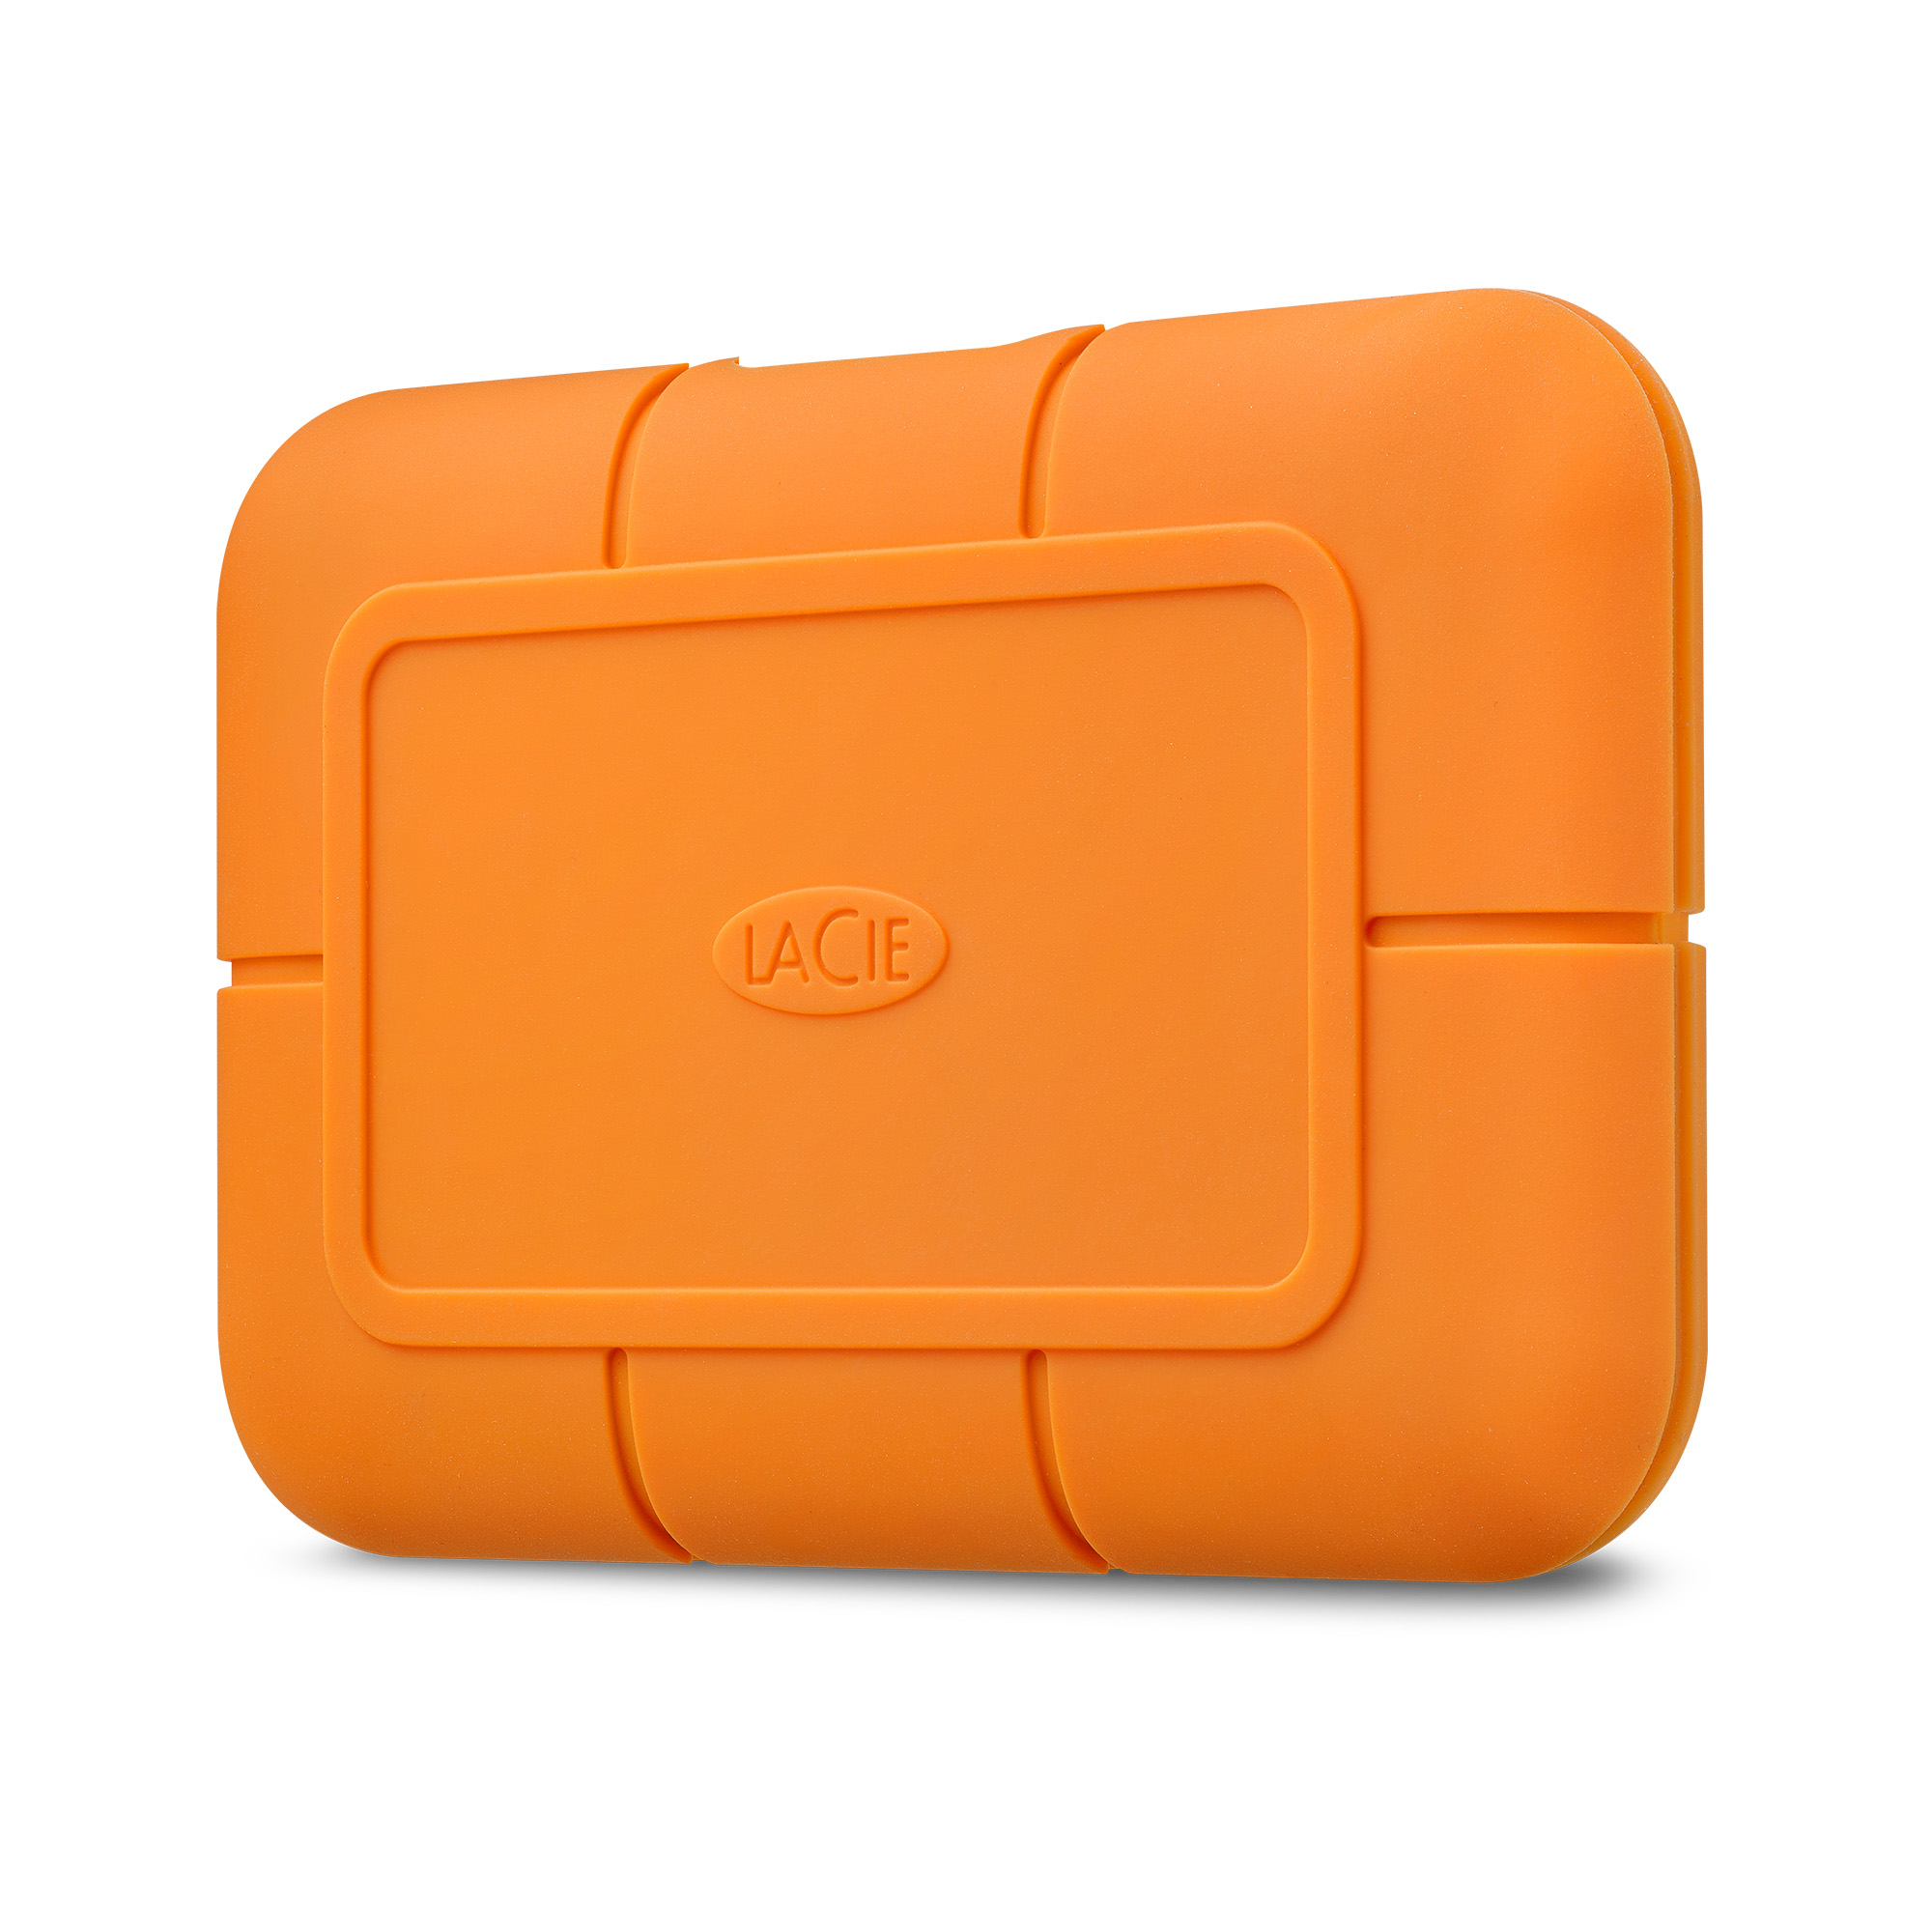 LaCie Rugged SSD & Rugged SSD Pro - Worth The Investment?